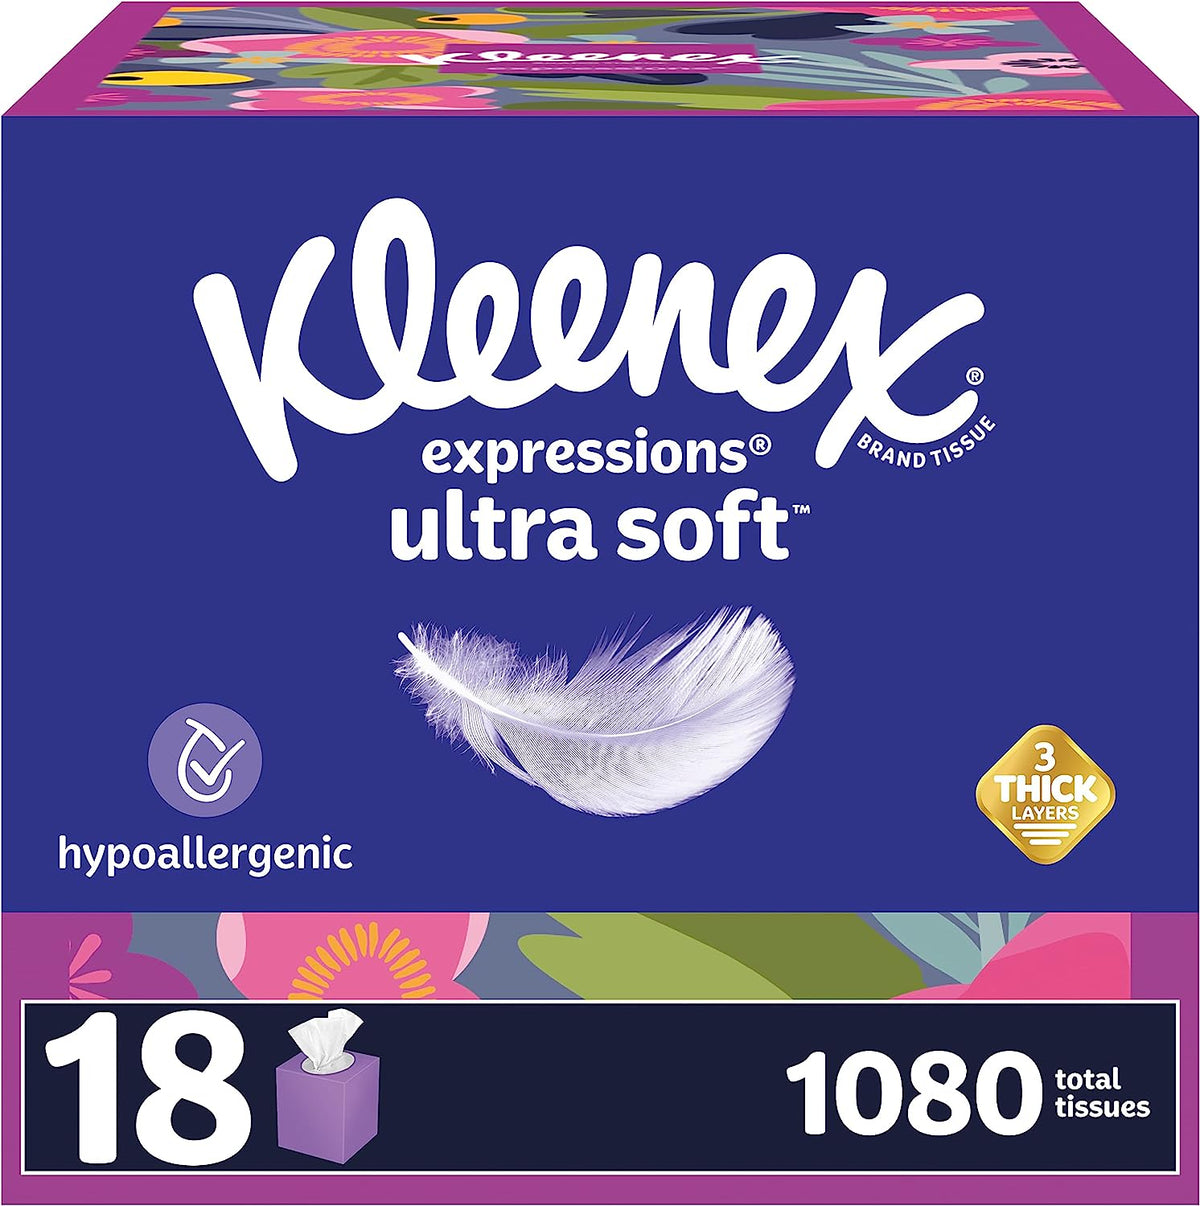 Kleenex Expressions Ultra Soft Facial Tissues, 18 Cube Boxes, 60 Tissues per Box, 3-Ply (1,080 Total Tissues), Packaging May Vary